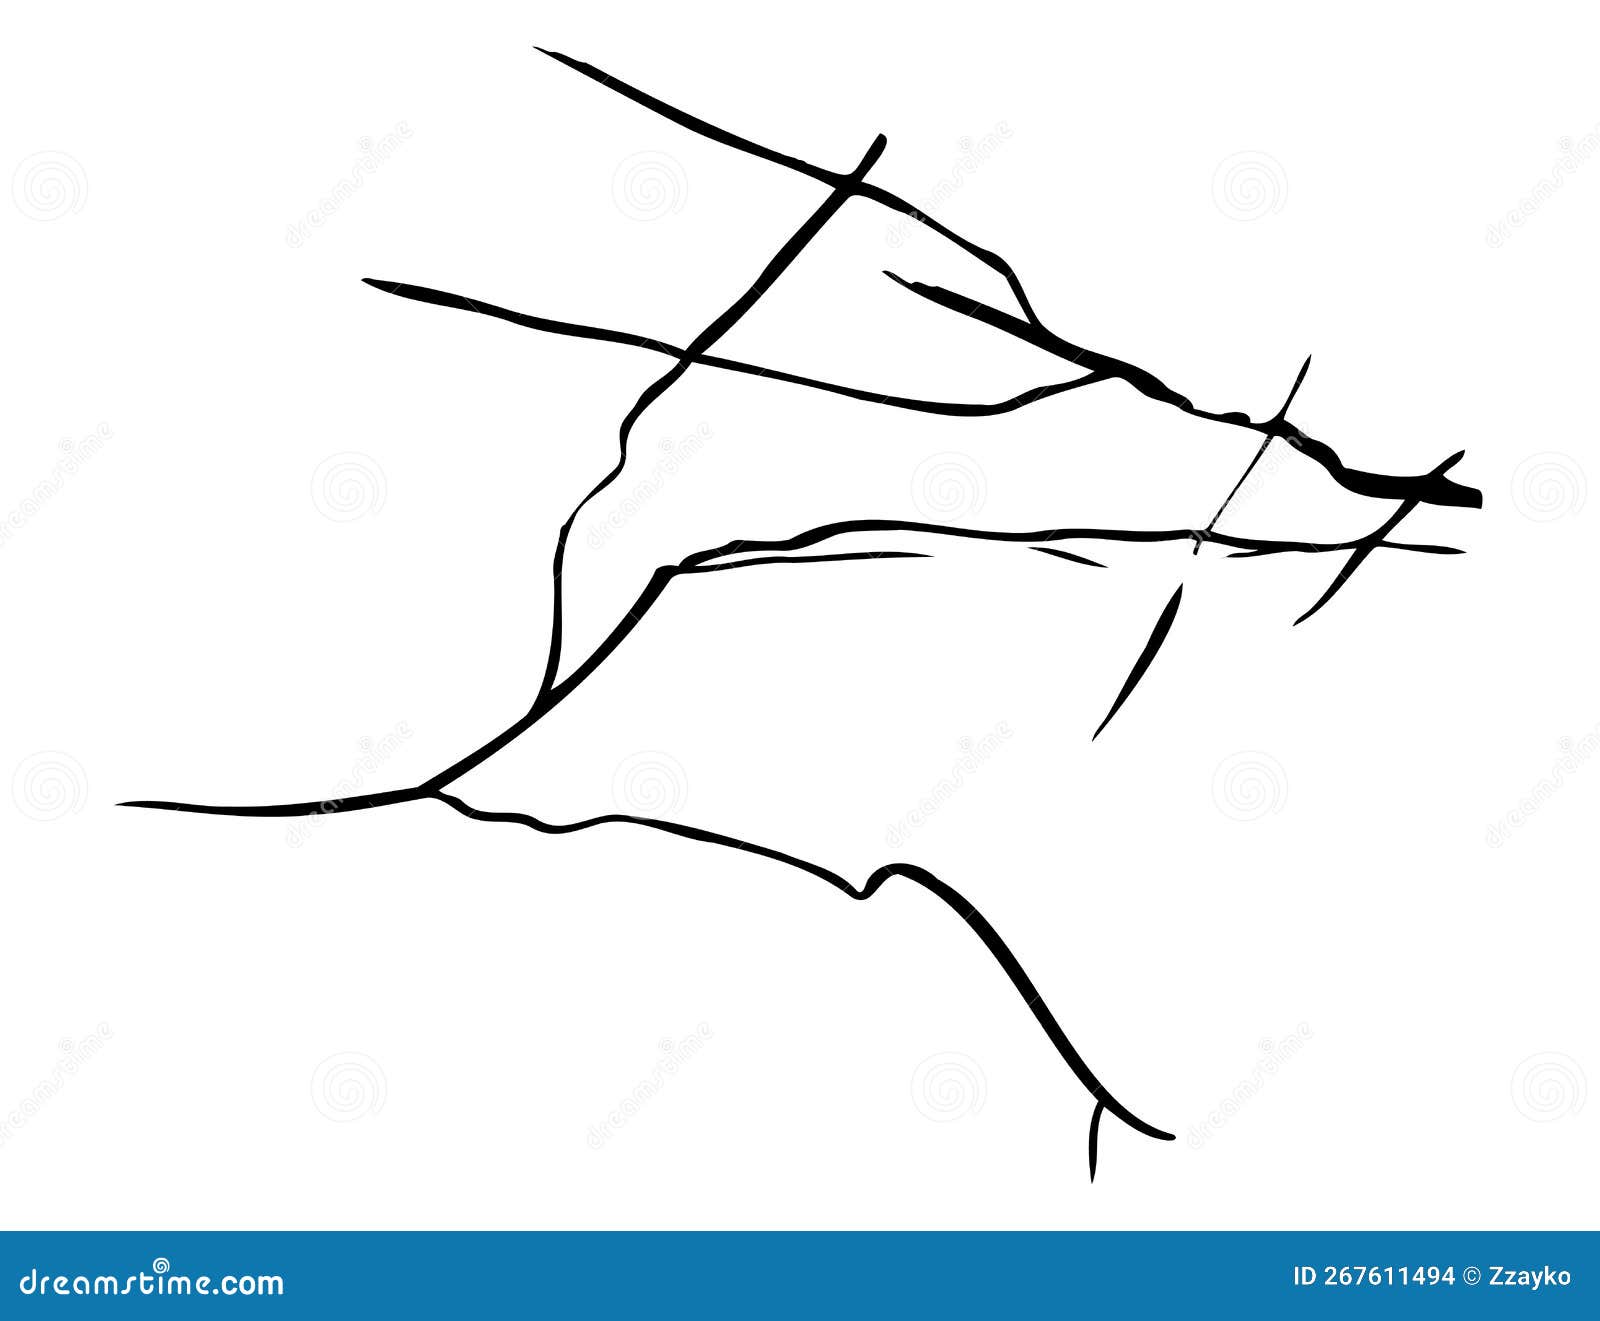 Ice crack realistic sketch Black line isolated no white ~ Clip Art  #231434795